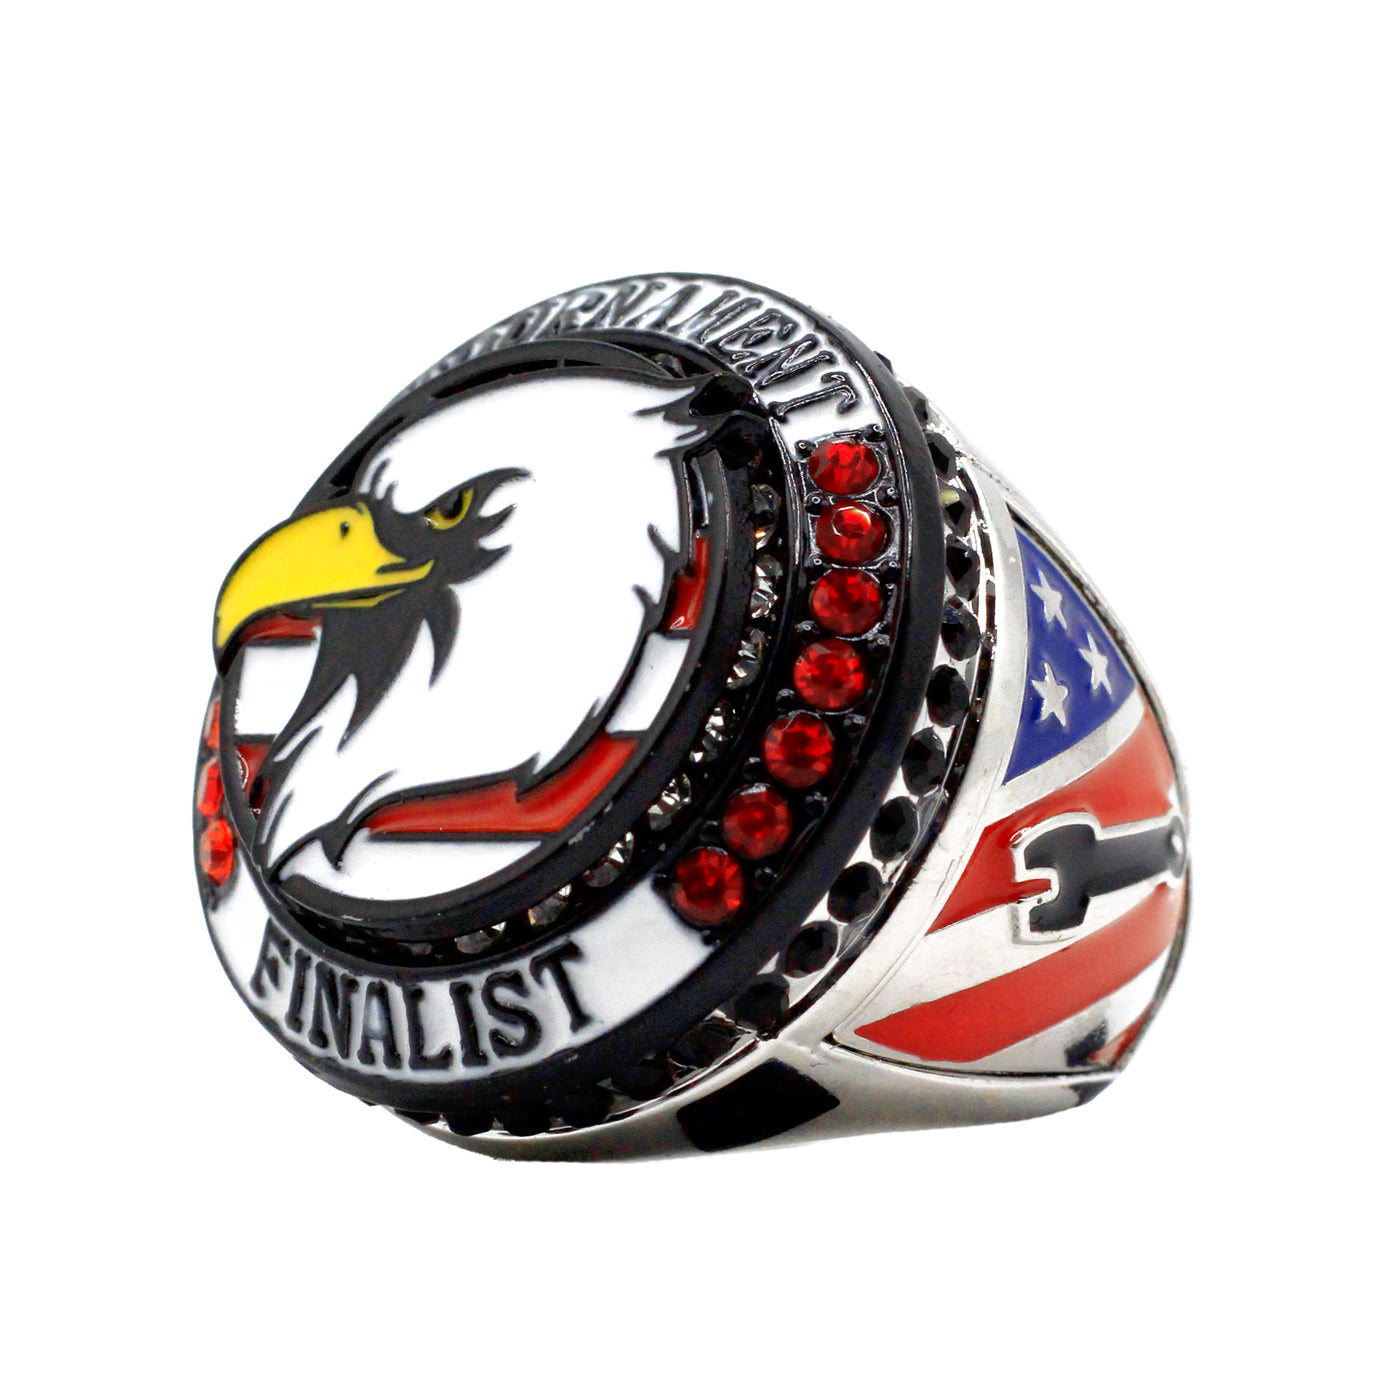 MEMORIAL DAY EAGLE TOURNAMENT FINALIST RING